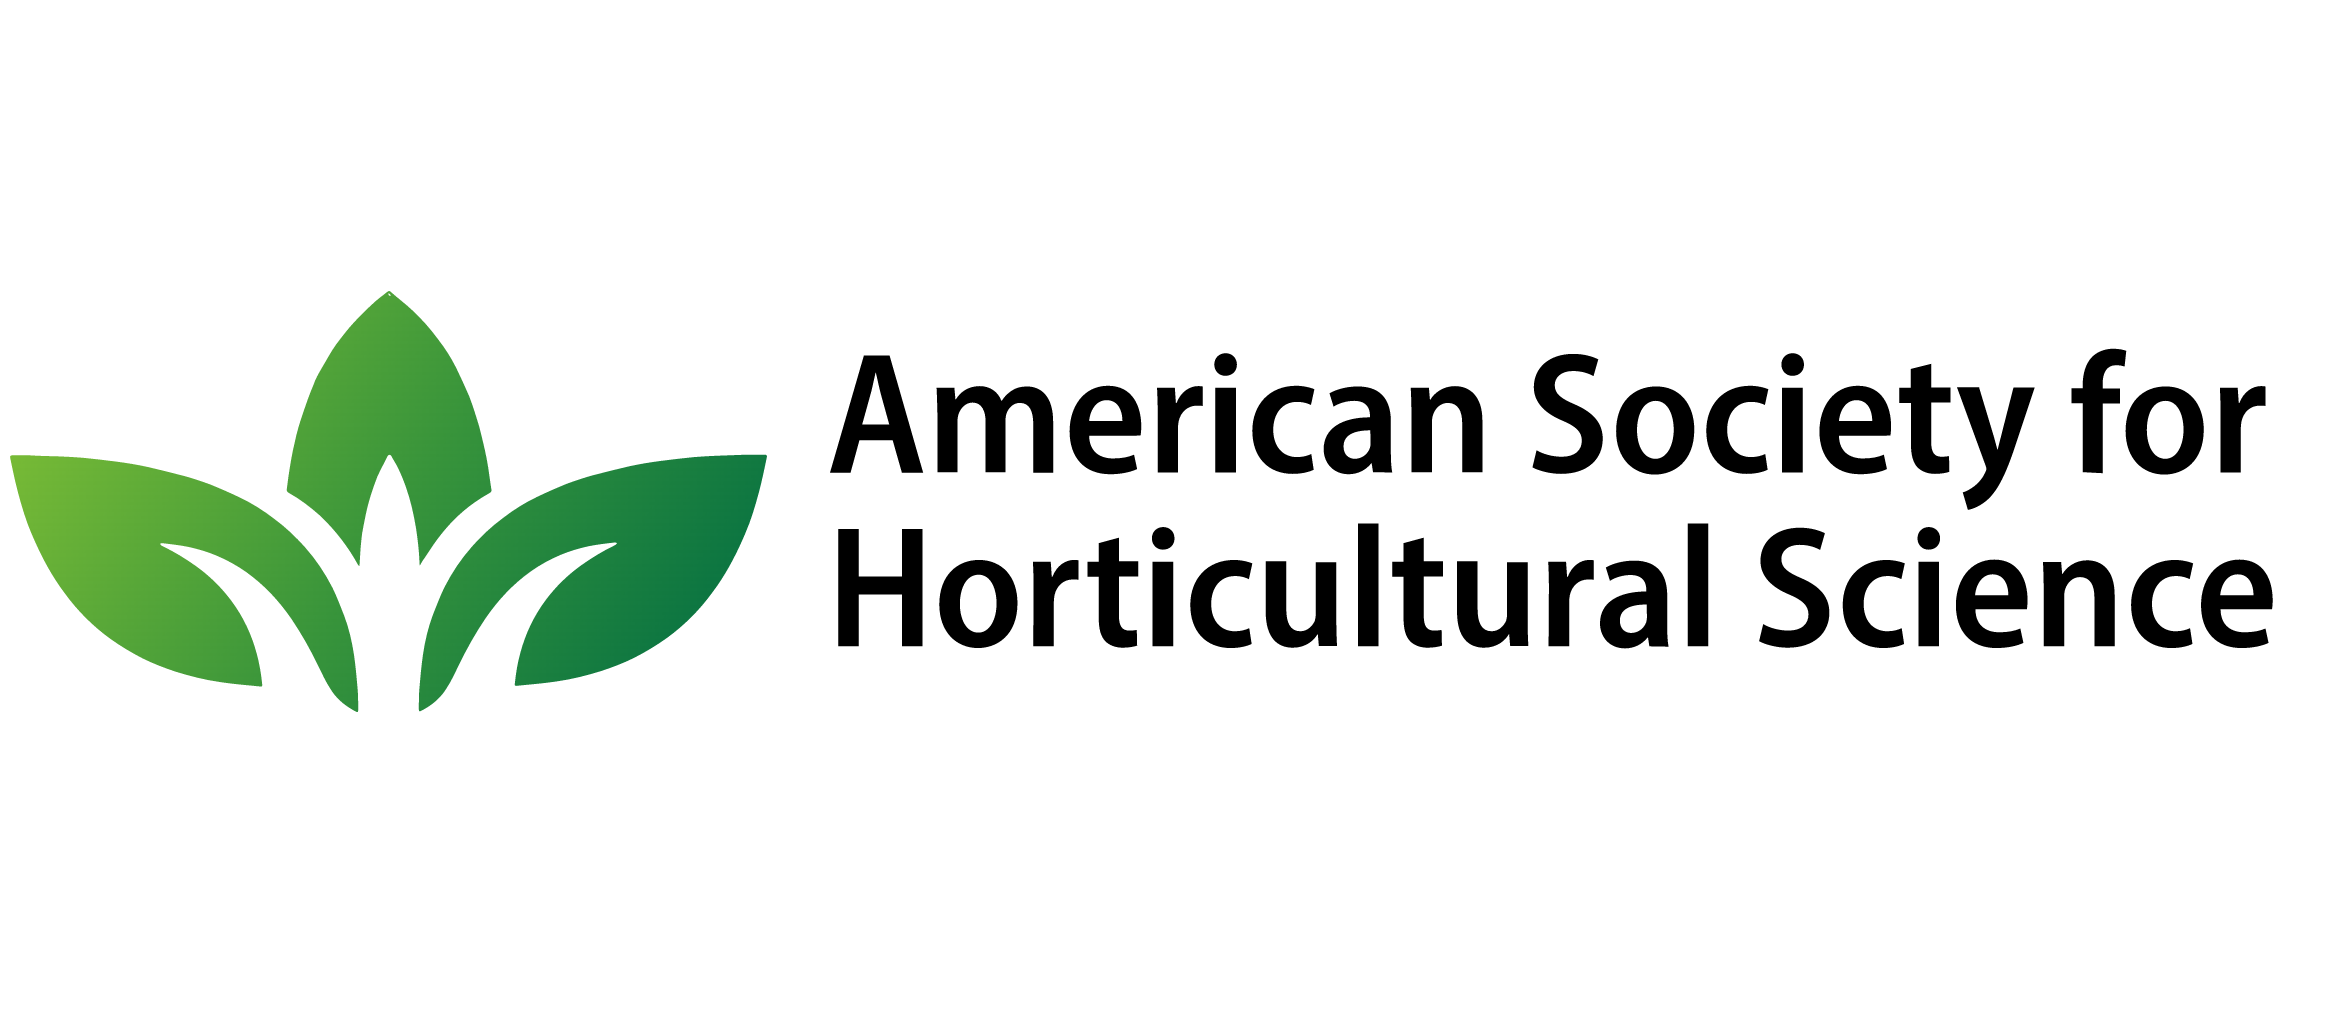 American Society for Horticultural Science（美国园艺科学学会）